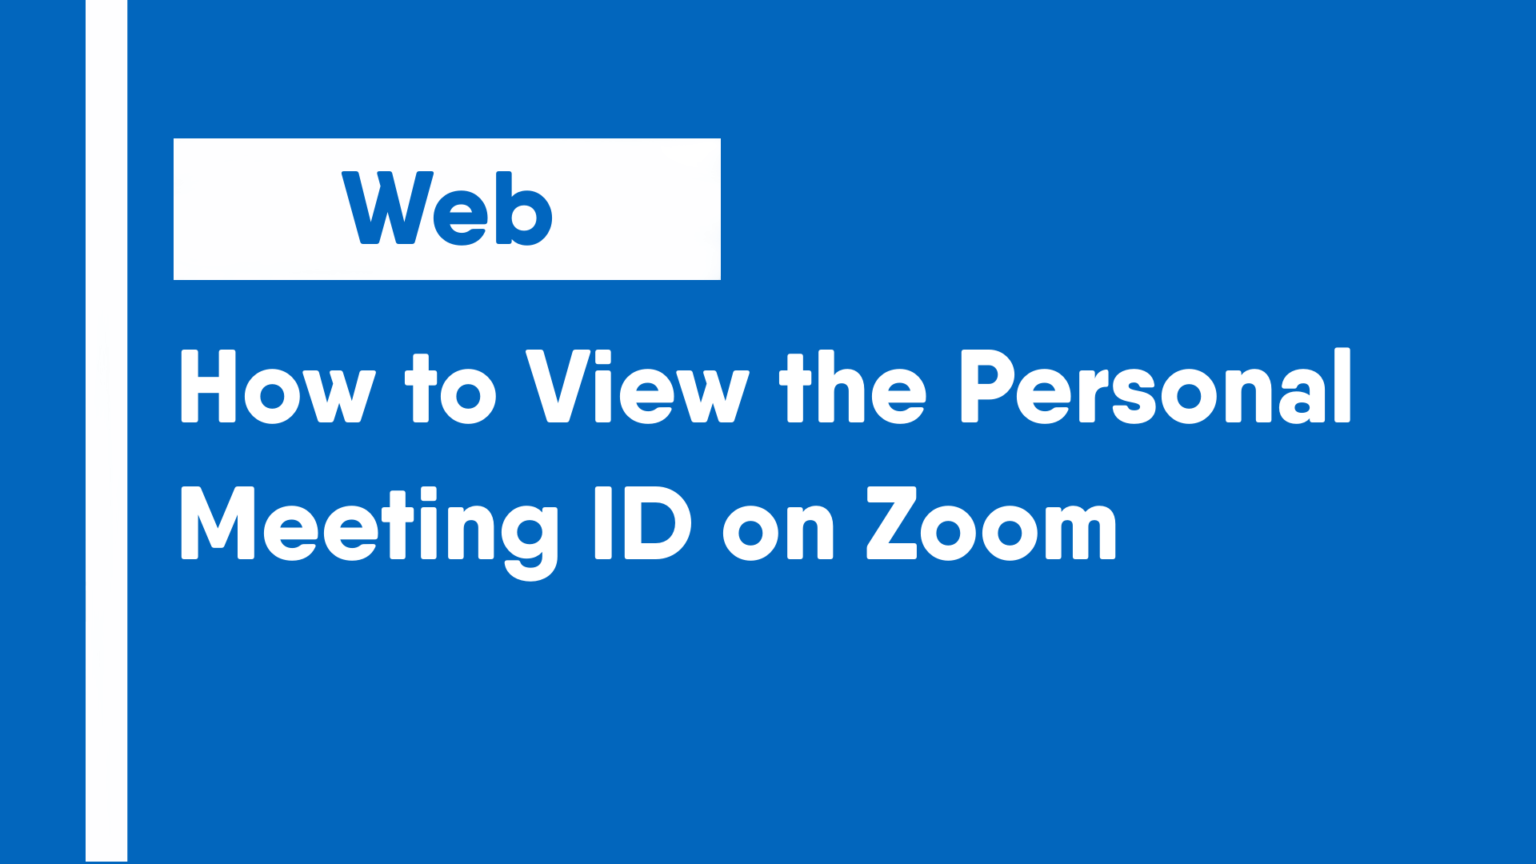 zoom is the call in number always the same for a personal meeting id